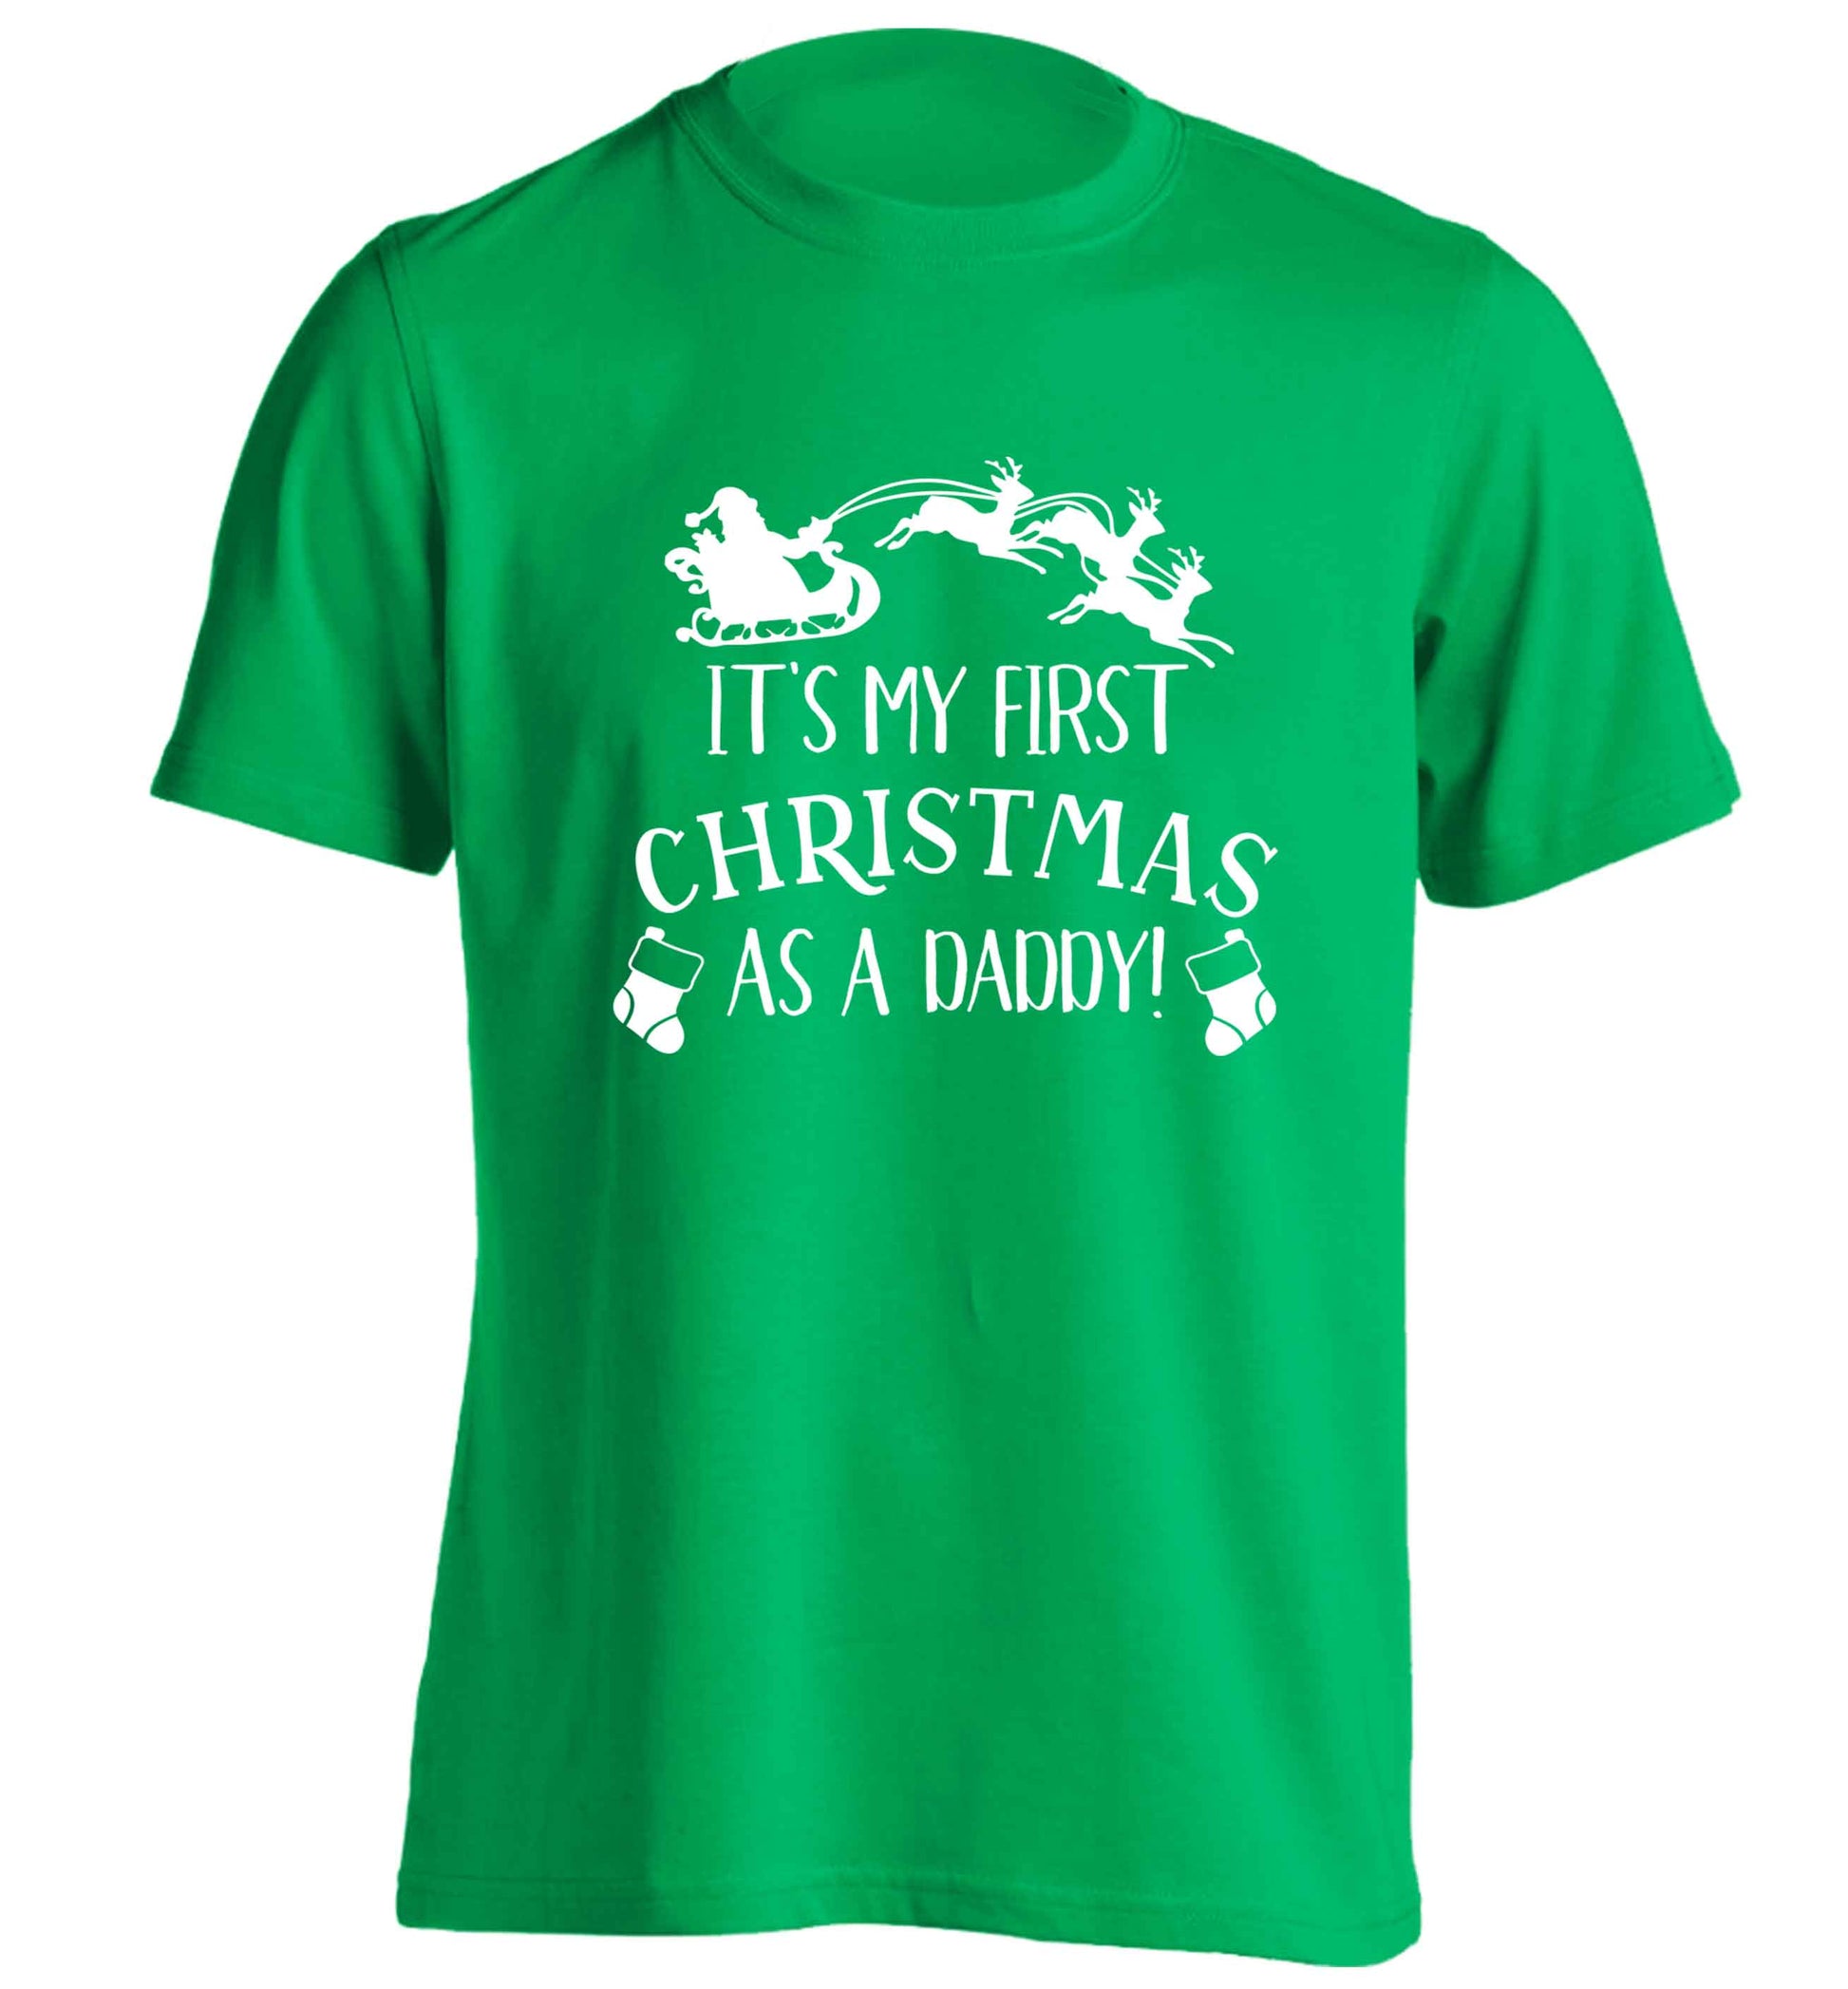 It's my first Christmas as a daddy adults unisex green Tshirt 2XL